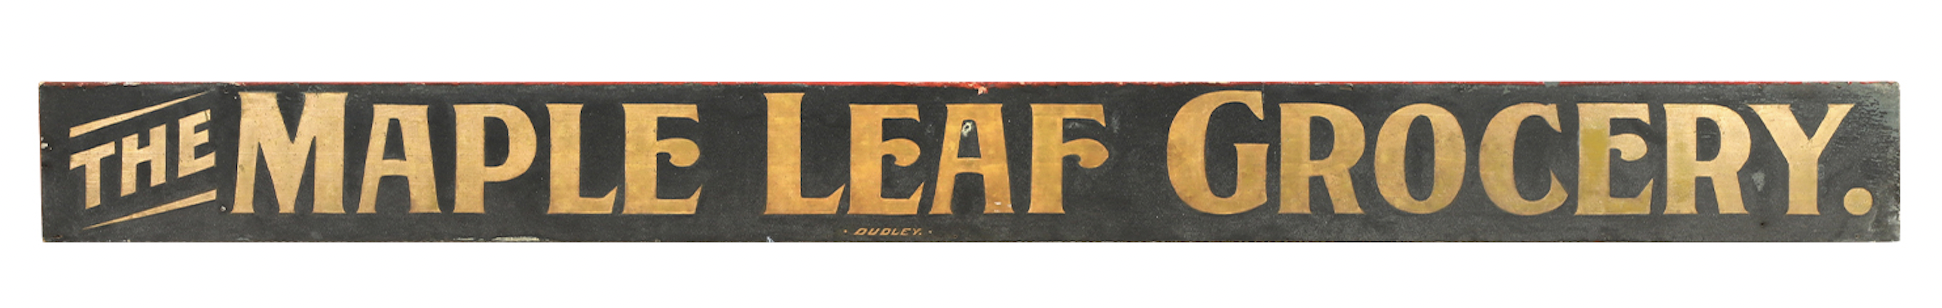 Circa-1900 painted sign for the Maple Leaf Grocery, estimated at CA$2,000-$3,500